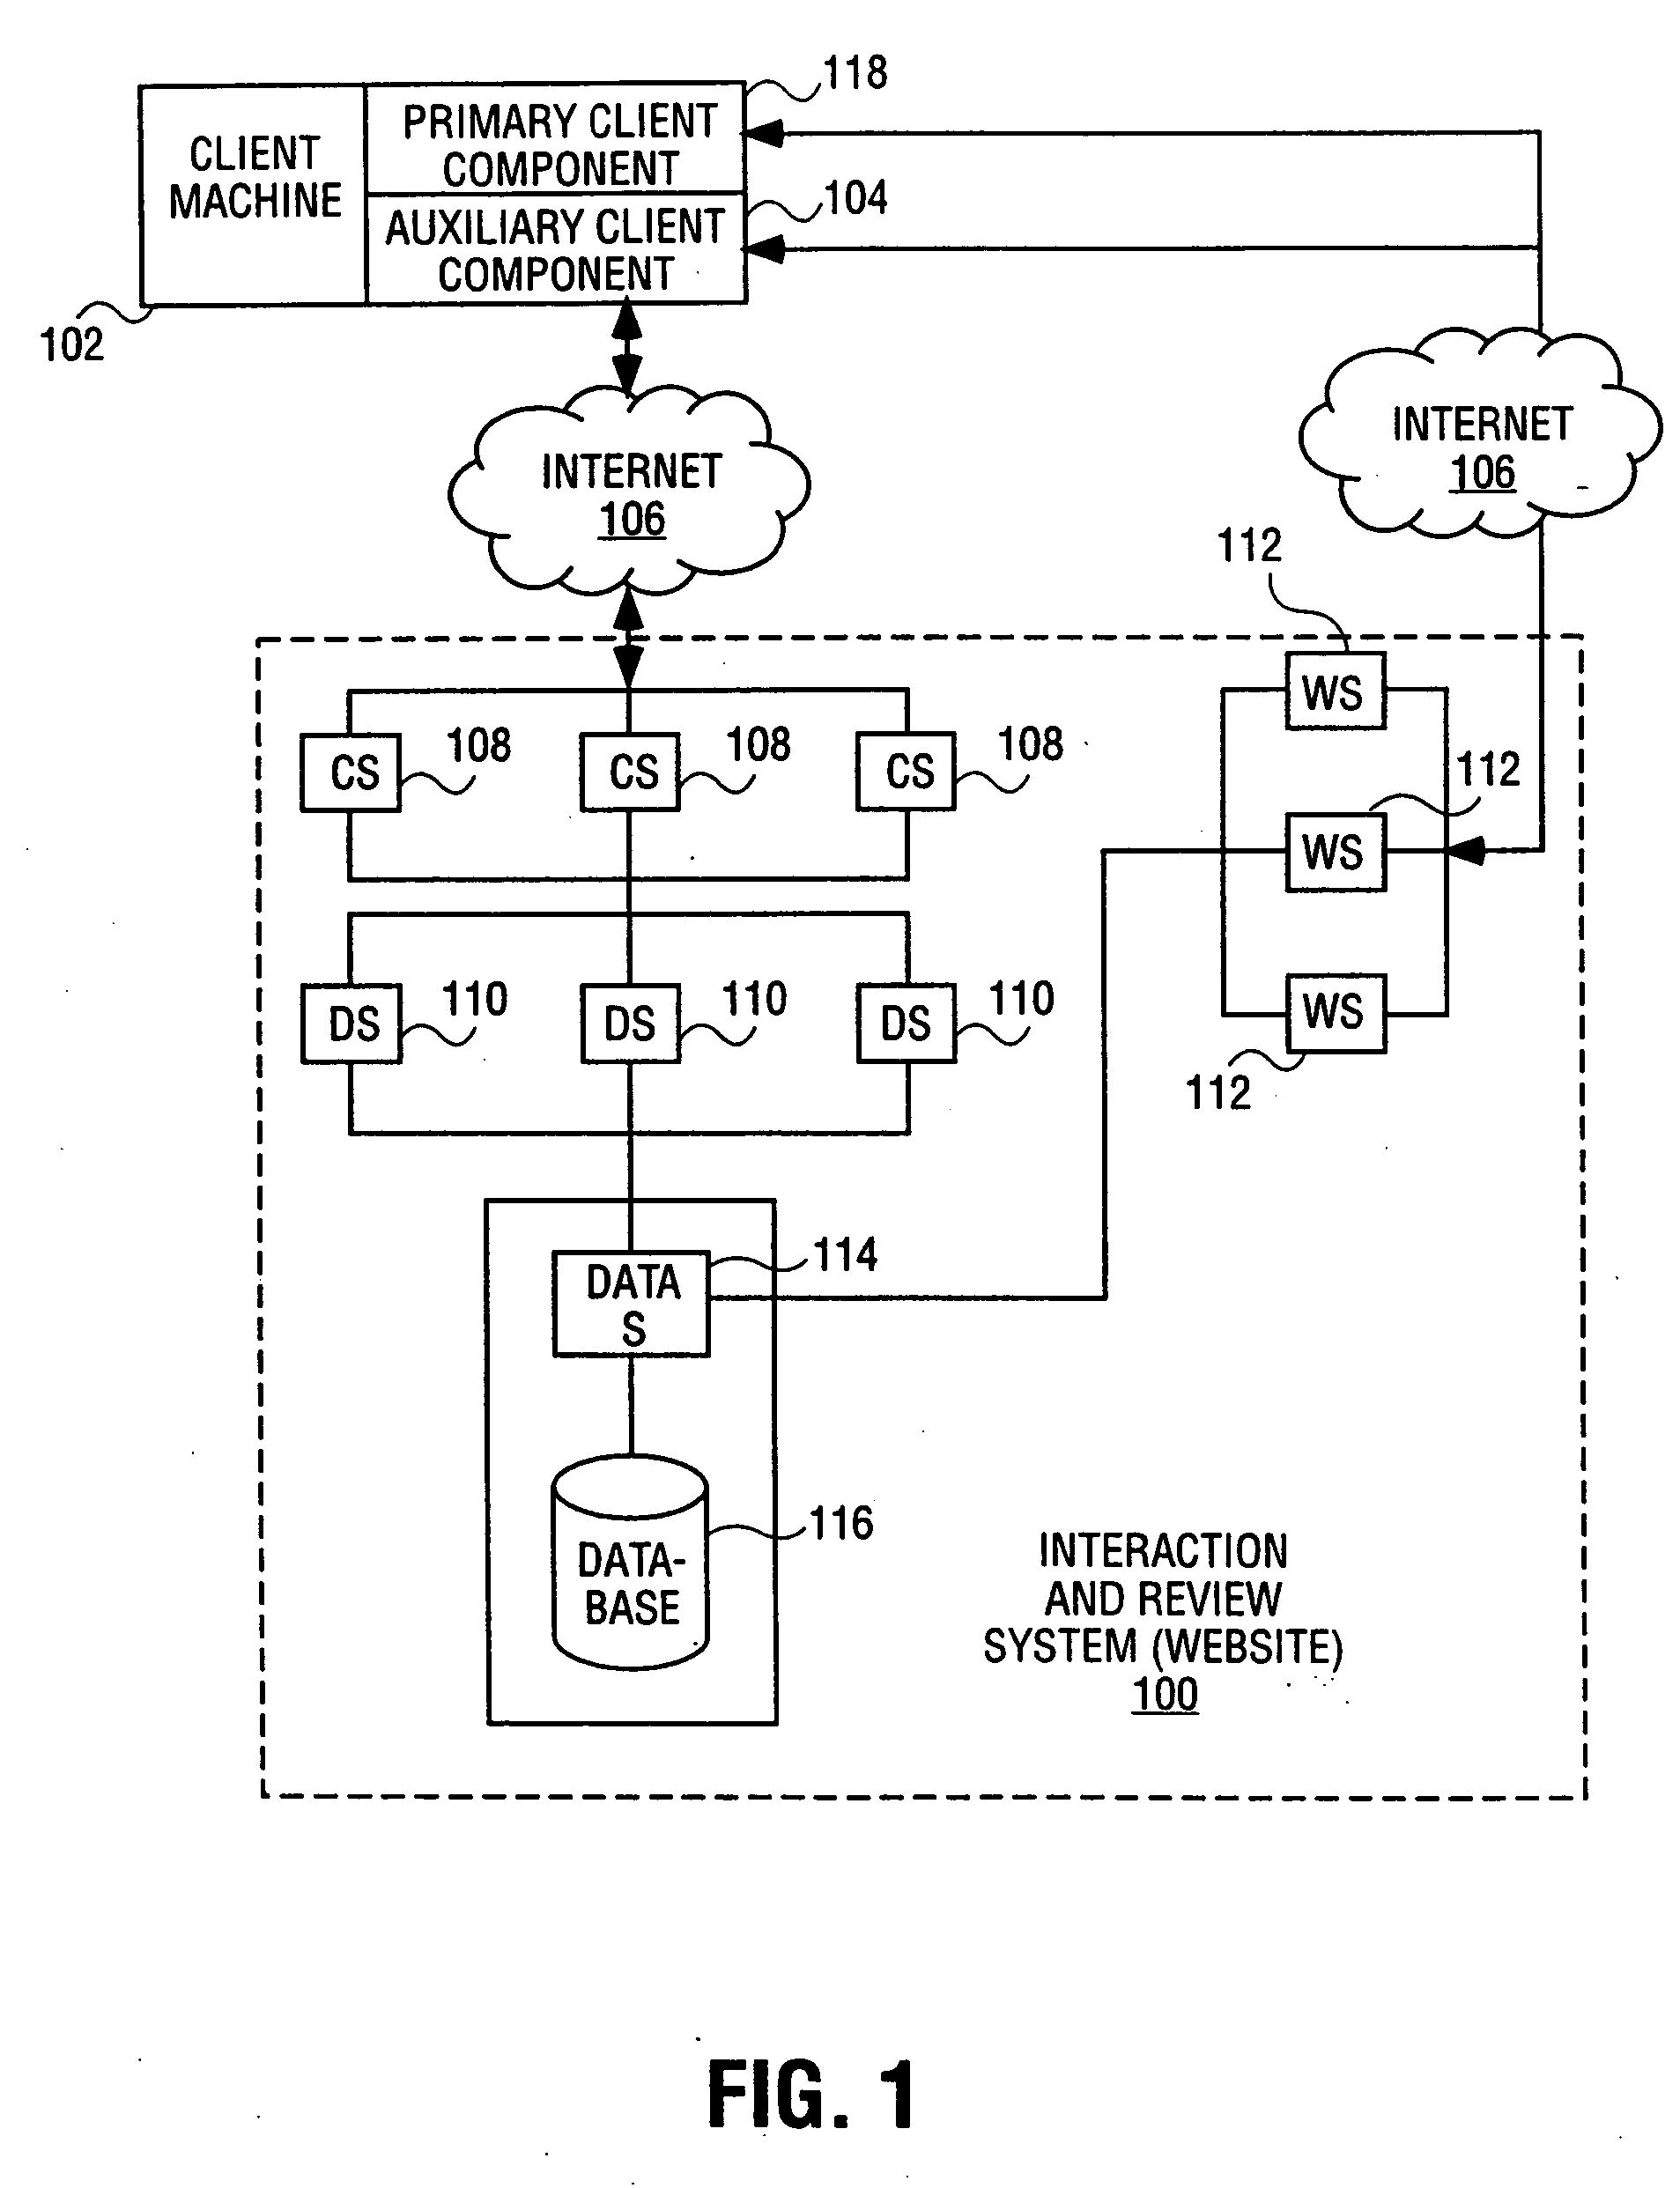 Network-based interaction and review service for facilitating communication in a network-based commerce environment